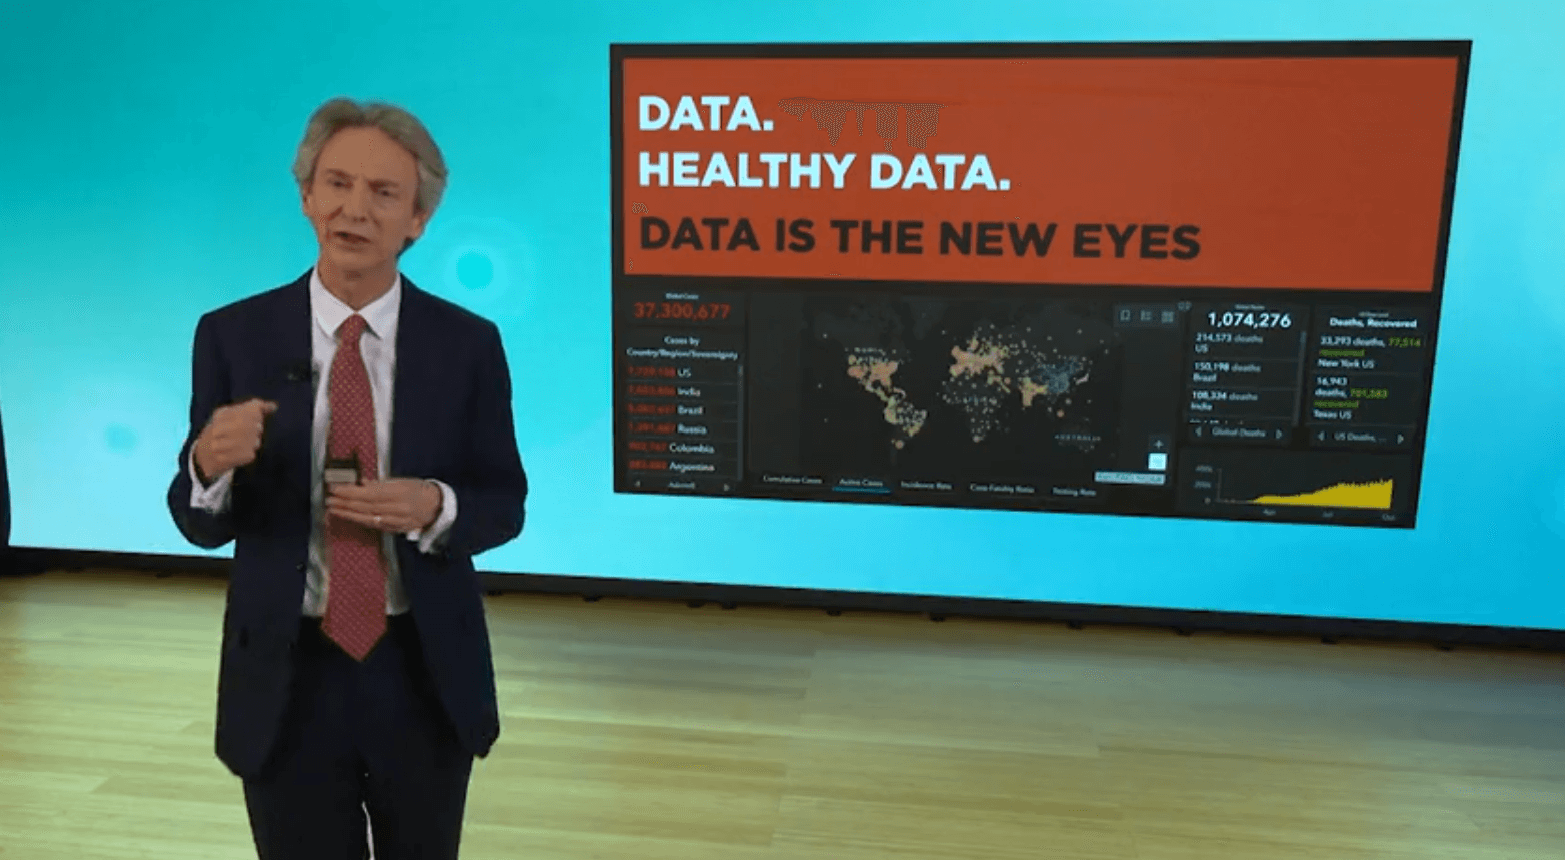 Our Vision for Healthcare- Healthy Data and Beyond